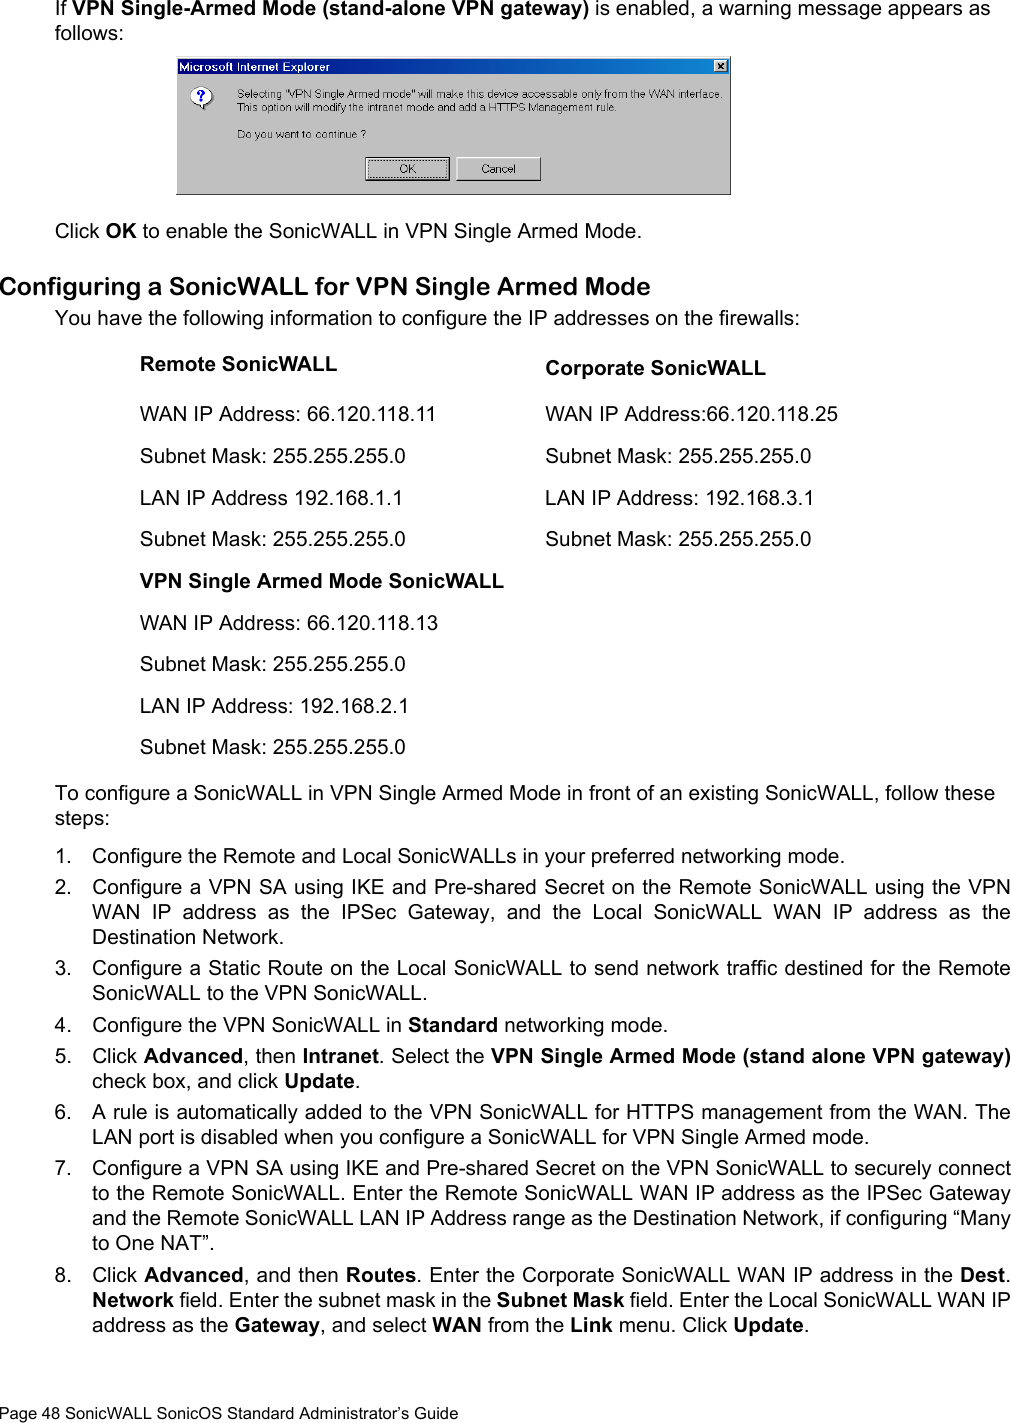 Page 48 SonicWALL SonicOS Standard Administrator’s GuideIf VPN Single-Armed Mode (stand-alone VPN gateway) is enabled, a warning message appears as follows: Click OK to enable the SonicWALL in VPN Single Armed Mode. Configuring a SonicWALL for VPN Single Armed ModeYou have the following information to configure the IP addresses on the firewalls:To configure a SonicWALL in VPN Single Armed Mode in front of an existing SonicWALL, follow these steps: 1. Configure the Remote and Local SonicWALLs in your preferred networking mode. 2. Configure a VPN SA using IKE and Pre-shared Secret on the Remote SonicWALL using the VPNWAN IP address as the IPSec Gateway, and the Local SonicWALL WAN IP address as theDestination Network. 3. Configure a Static Route on the Local SonicWALL to send network traffic destined for the RemoteSonicWALL to the VPN SonicWALL. 4. Configure the VPN SonicWALL in Standard networking mode. 5. Click Advanced, then Intranet. Select the VPN Single Armed Mode (stand alone VPN gateway)check box, and click Update.6. A rule is automatically added to the VPN SonicWALL for HTTPS management from the WAN. TheLAN port is disabled when you configure a SonicWALL for VPN Single Armed mode. 7. Configure a VPN SA using IKE and Pre-shared Secret on the VPN SonicWALL to securely connectto the Remote SonicWALL. Enter the Remote SonicWALL WAN IP address as the IPSec Gatewayand the Remote SonicWALL LAN IP Address range as the Destination Network, if configuring “Manyto One NAT”. 8. Click Advanced, and then Routes. Enter the Corporate SonicWALL WAN IP address in the Dest.Network field. Enter the subnet mask in the Subnet Mask field. Enter the Local SonicWALL WAN IPaddress as the Gateway, and select WAN from the Link menu. Click Update. Remote SonicWALL Corporate SonicWALLWAN IP Address: 66.120.118.11 WAN IP Address:66.120.118.25Subnet Mask: 255.255.255.0 Subnet Mask: 255.255.255.0LAN IP Address 192.168.1.1 LAN IP Address: 192.168.3.1Subnet Mask: 255.255.255.0 Subnet Mask: 255.255.255.0VPN Single Armed Mode SonicWALLWAN IP Address: 66.120.118.13Subnet Mask: 255.255.255.0LAN IP Address: 192.168.2.1Subnet Mask: 255.255.255.0